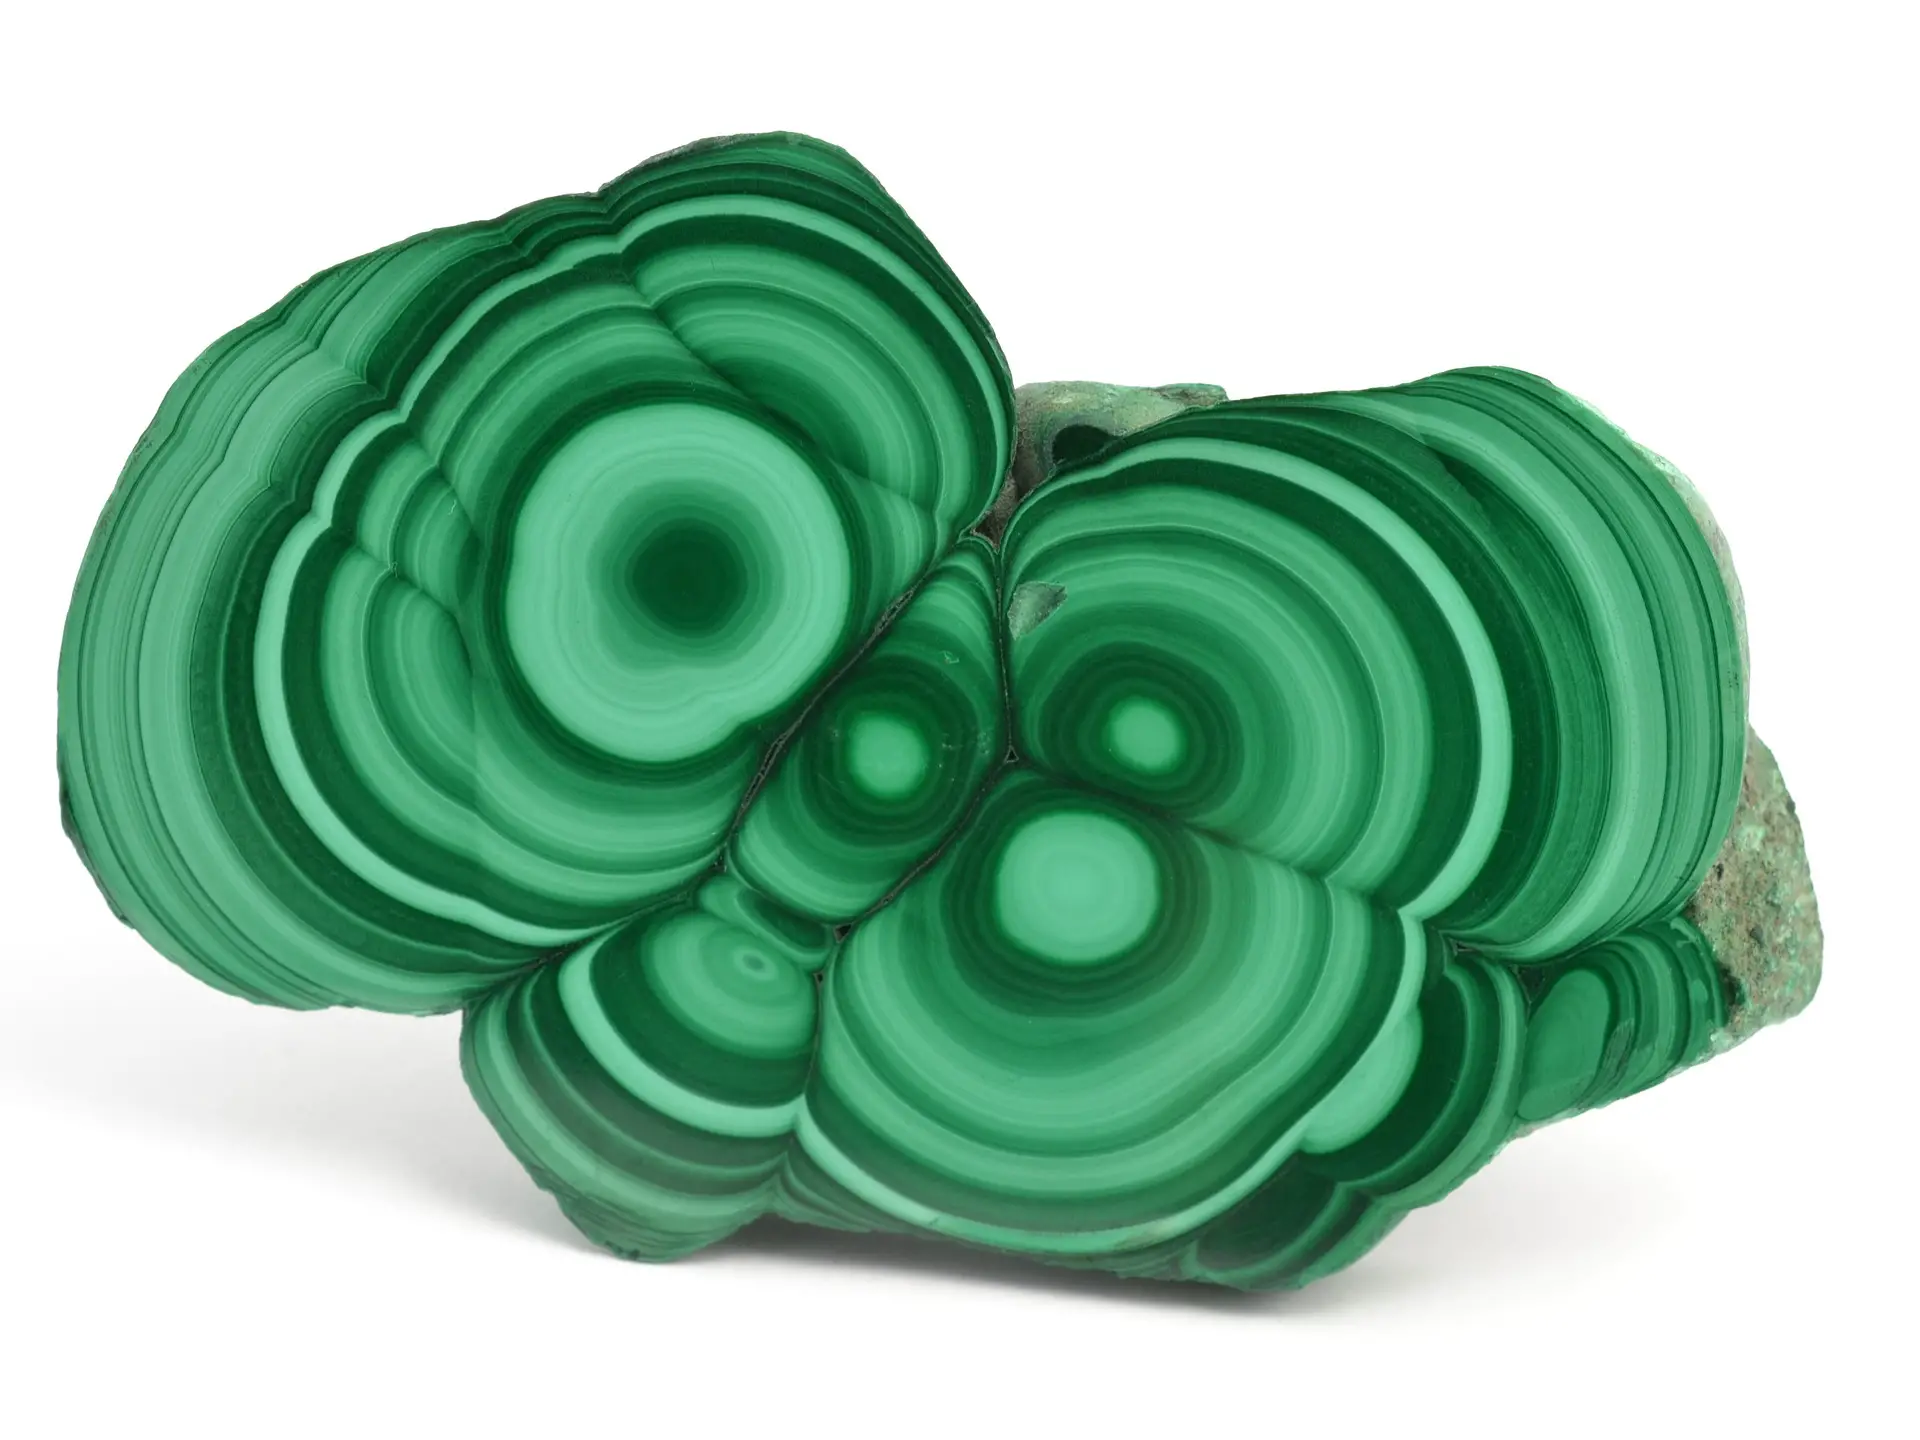 Malachite is Real or Fake